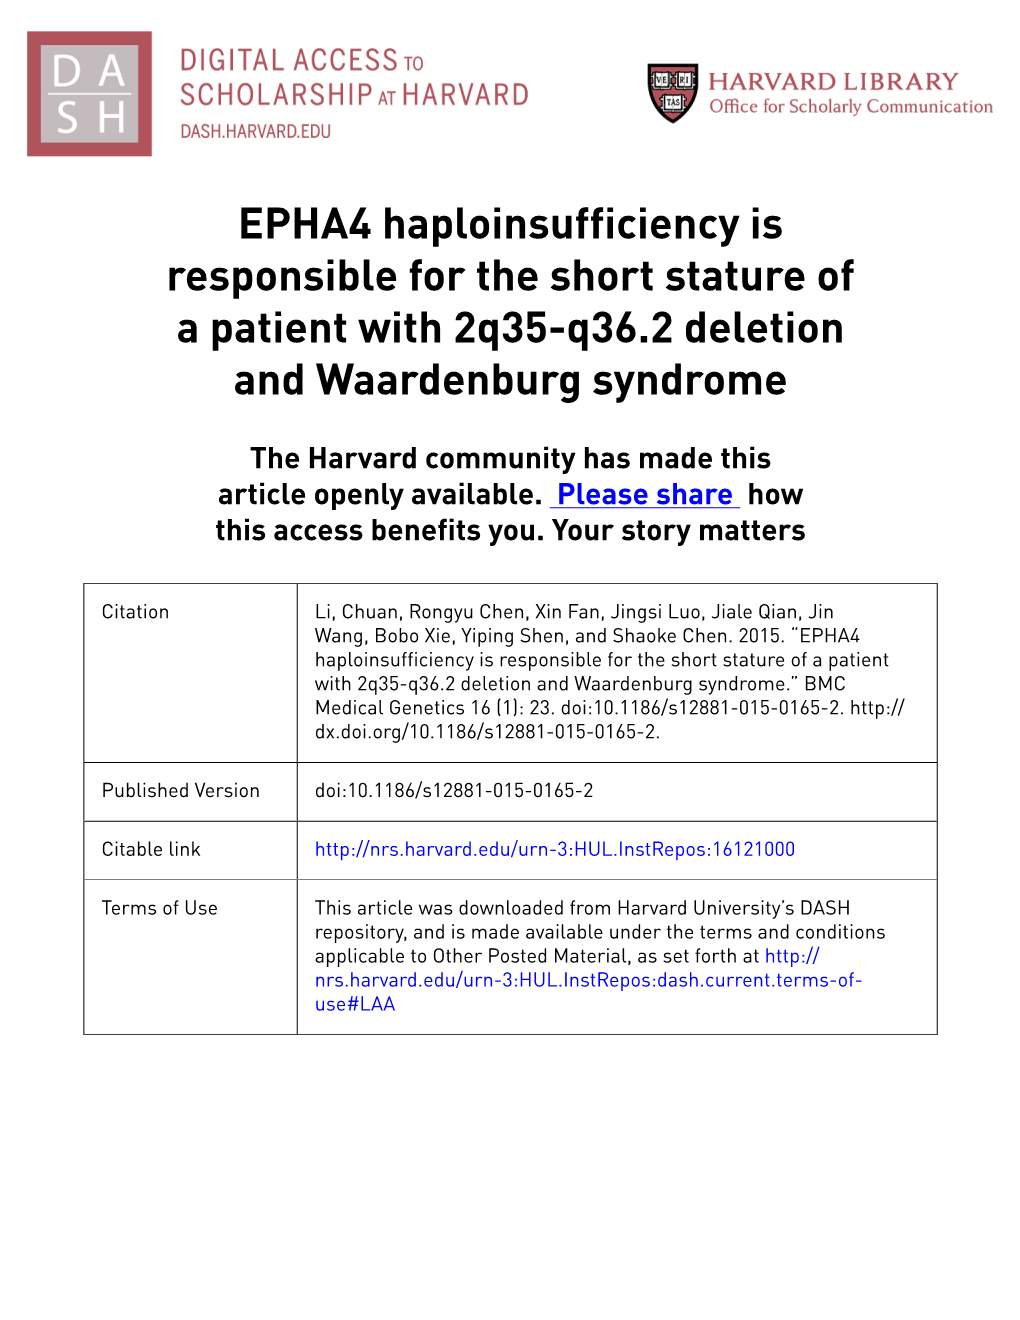 EPHA4 Haploinsufficiency Is Responsible for the Short Stature of a Patient with 2Q35-Q36.2 Deletion and Waardenburg Syndrome